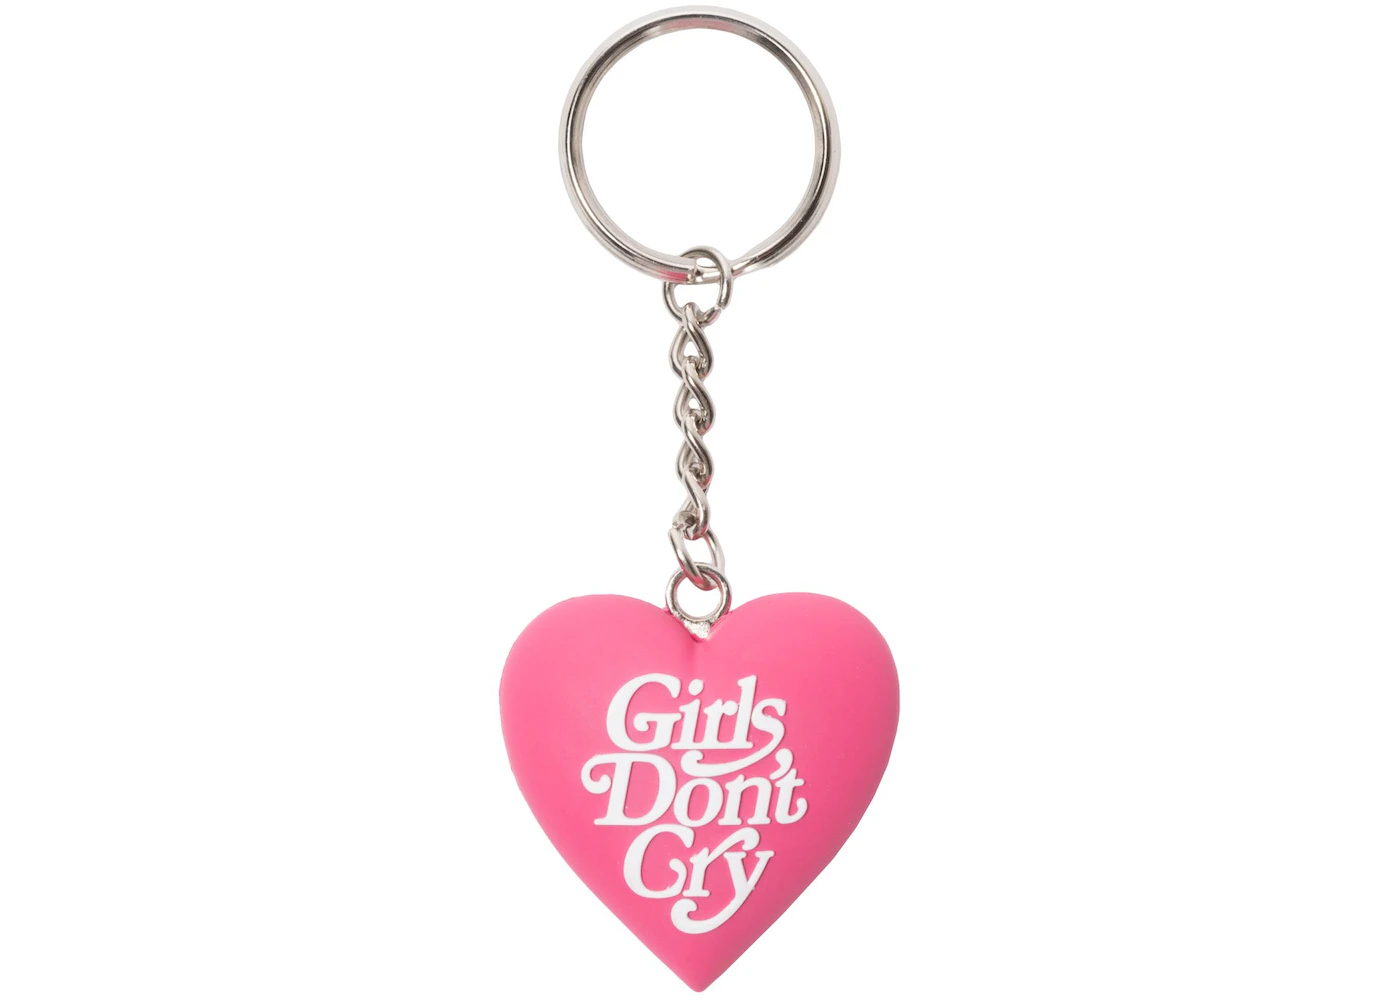 Girls Don't Cry Heart Keychain Pink - FW19